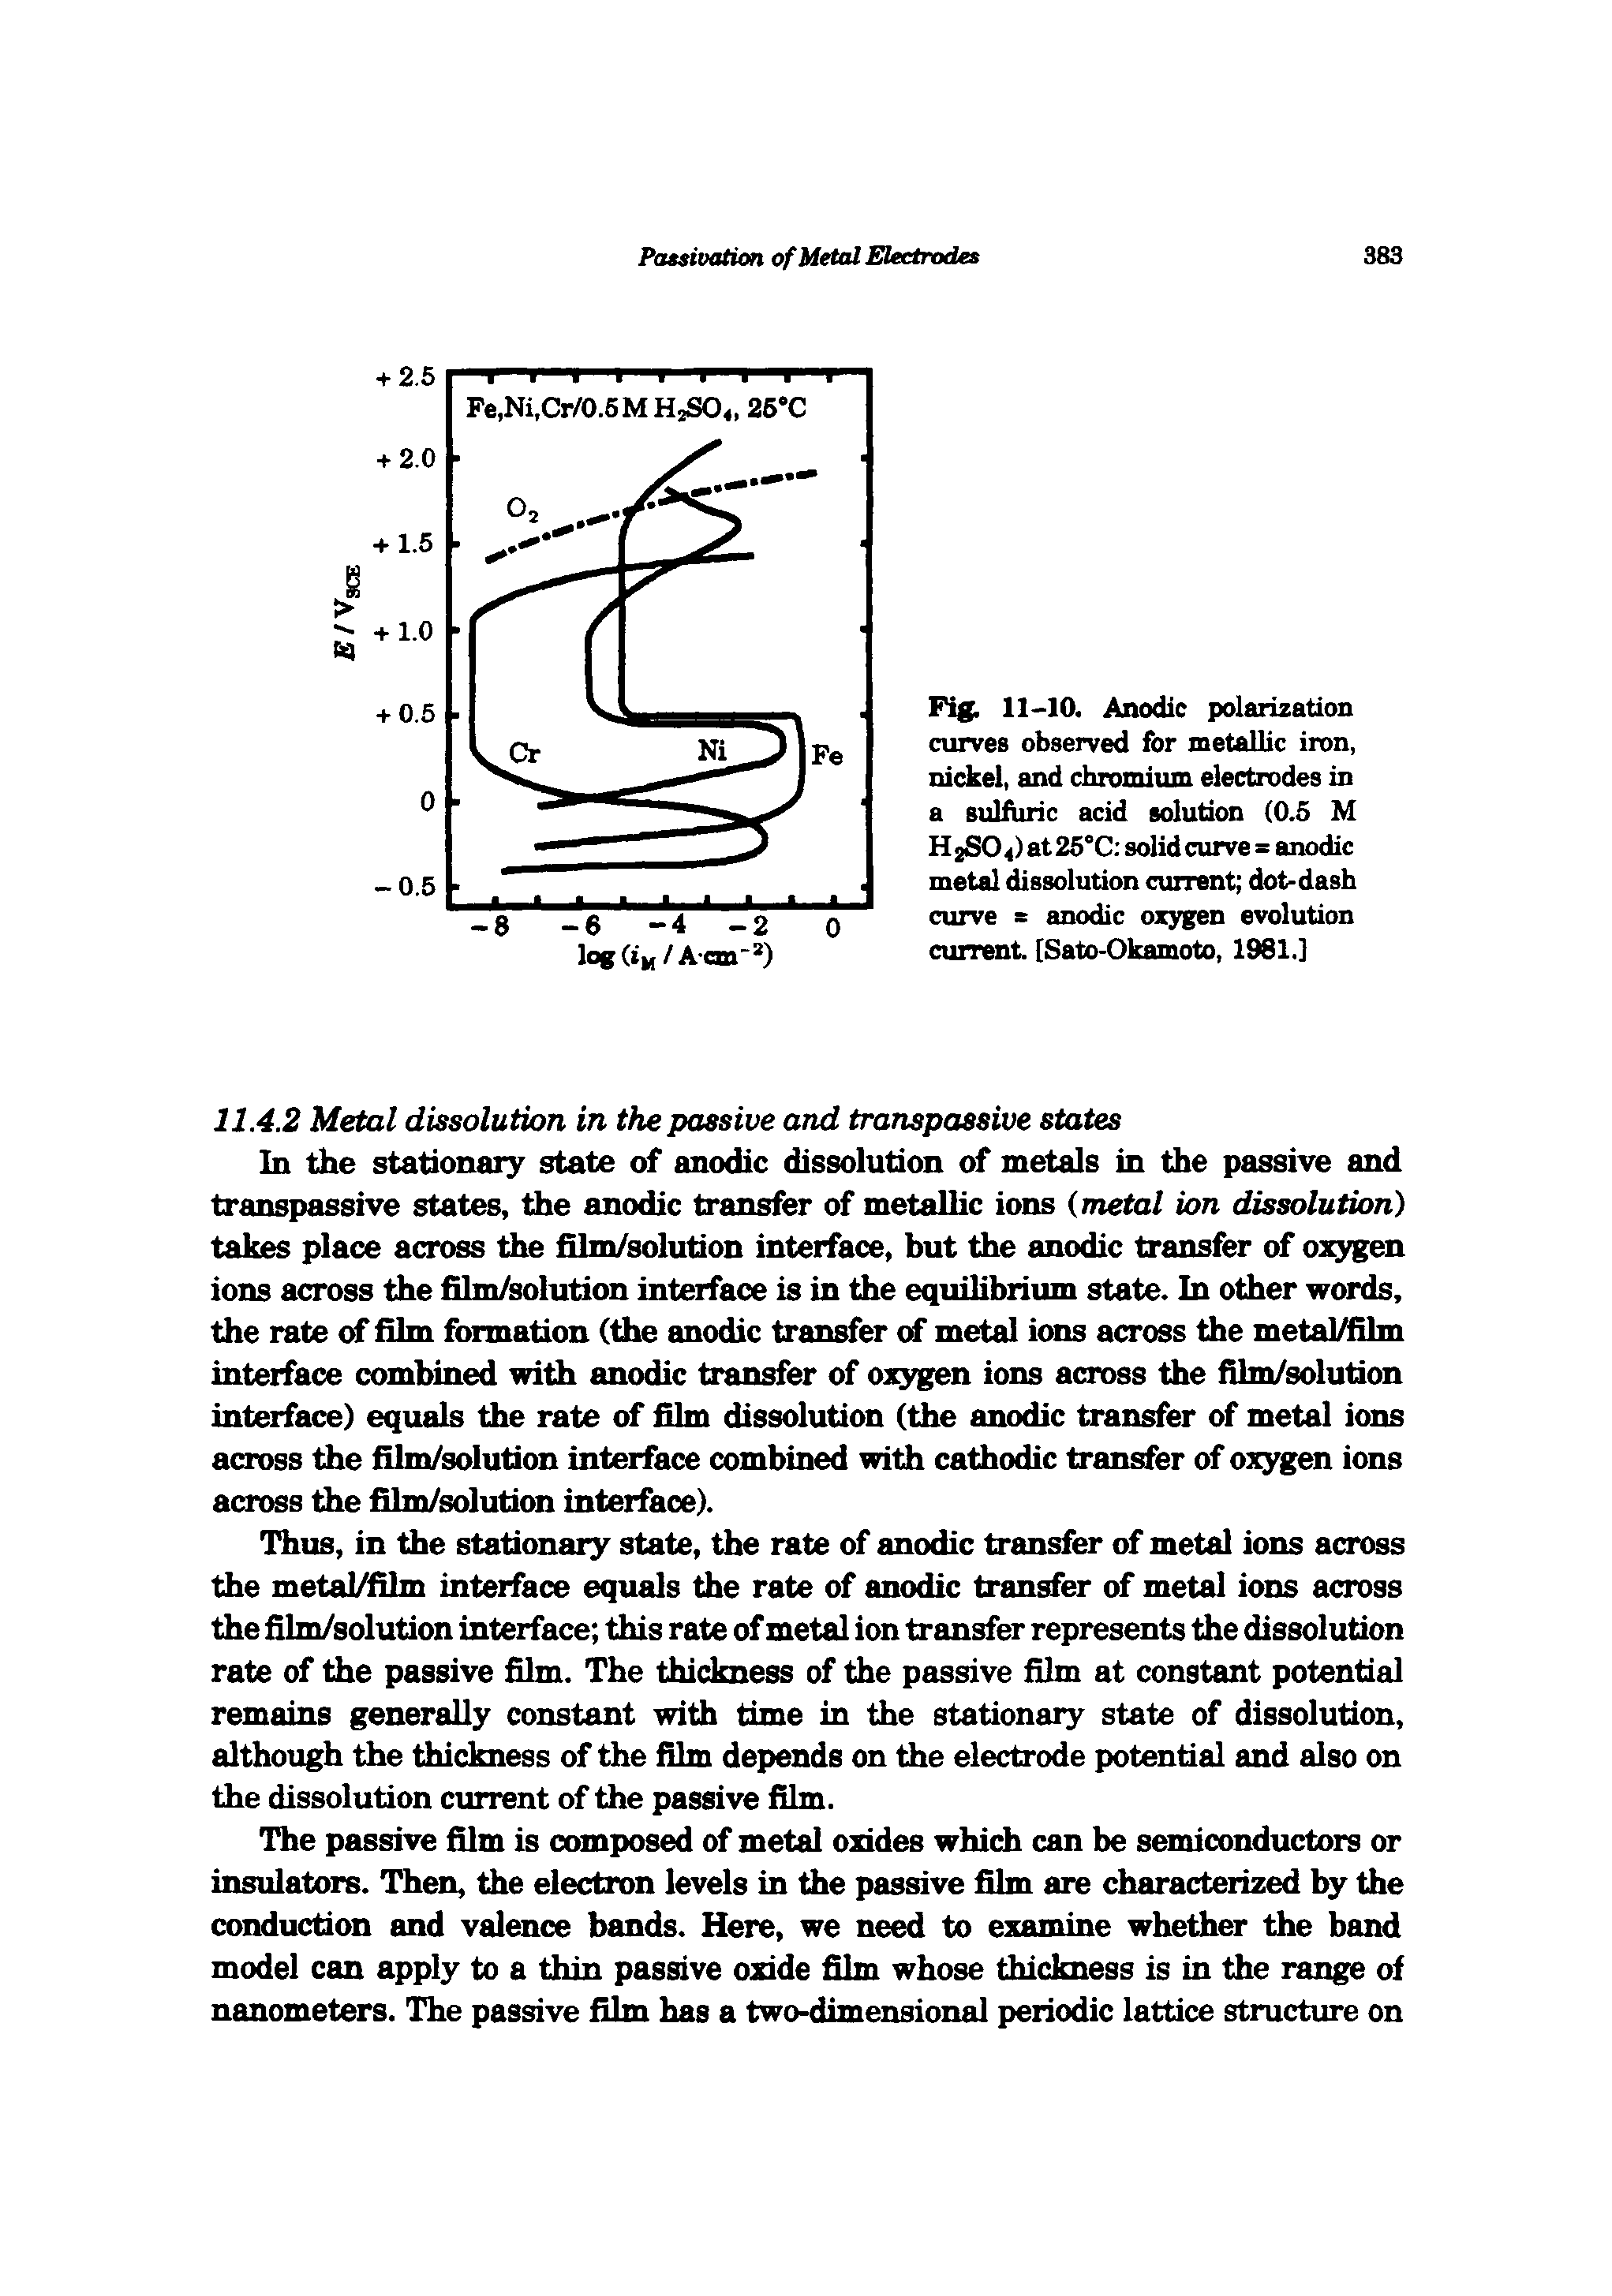 Fig. 11-10. Anodic polarization curves observed for metallic iron, nickel, and chromium electrodes in a sulfuric acid solution (0.5 M H 2SO 4) at 25°C solid curve = anodic metal dissolution current dot-dash curve s anodic oxygen evolution current [Sato-Okamoto, 1981.]...